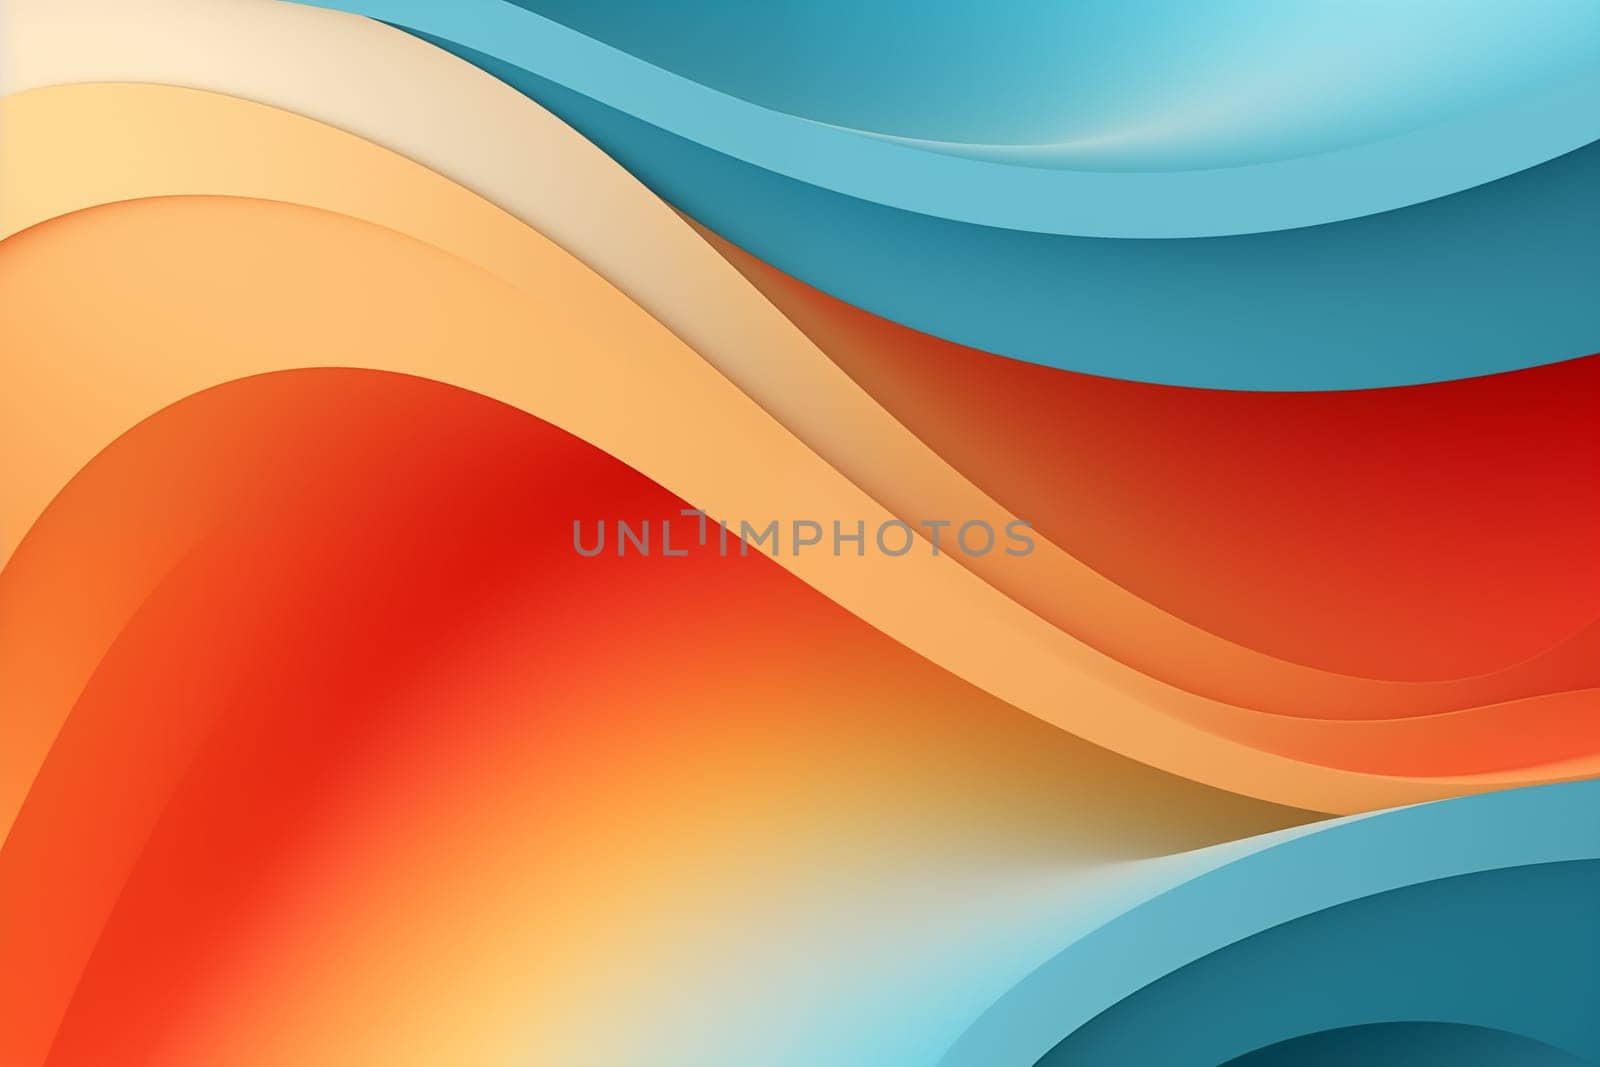 Abstract gradient fluid paper style background illustration. High quality photo